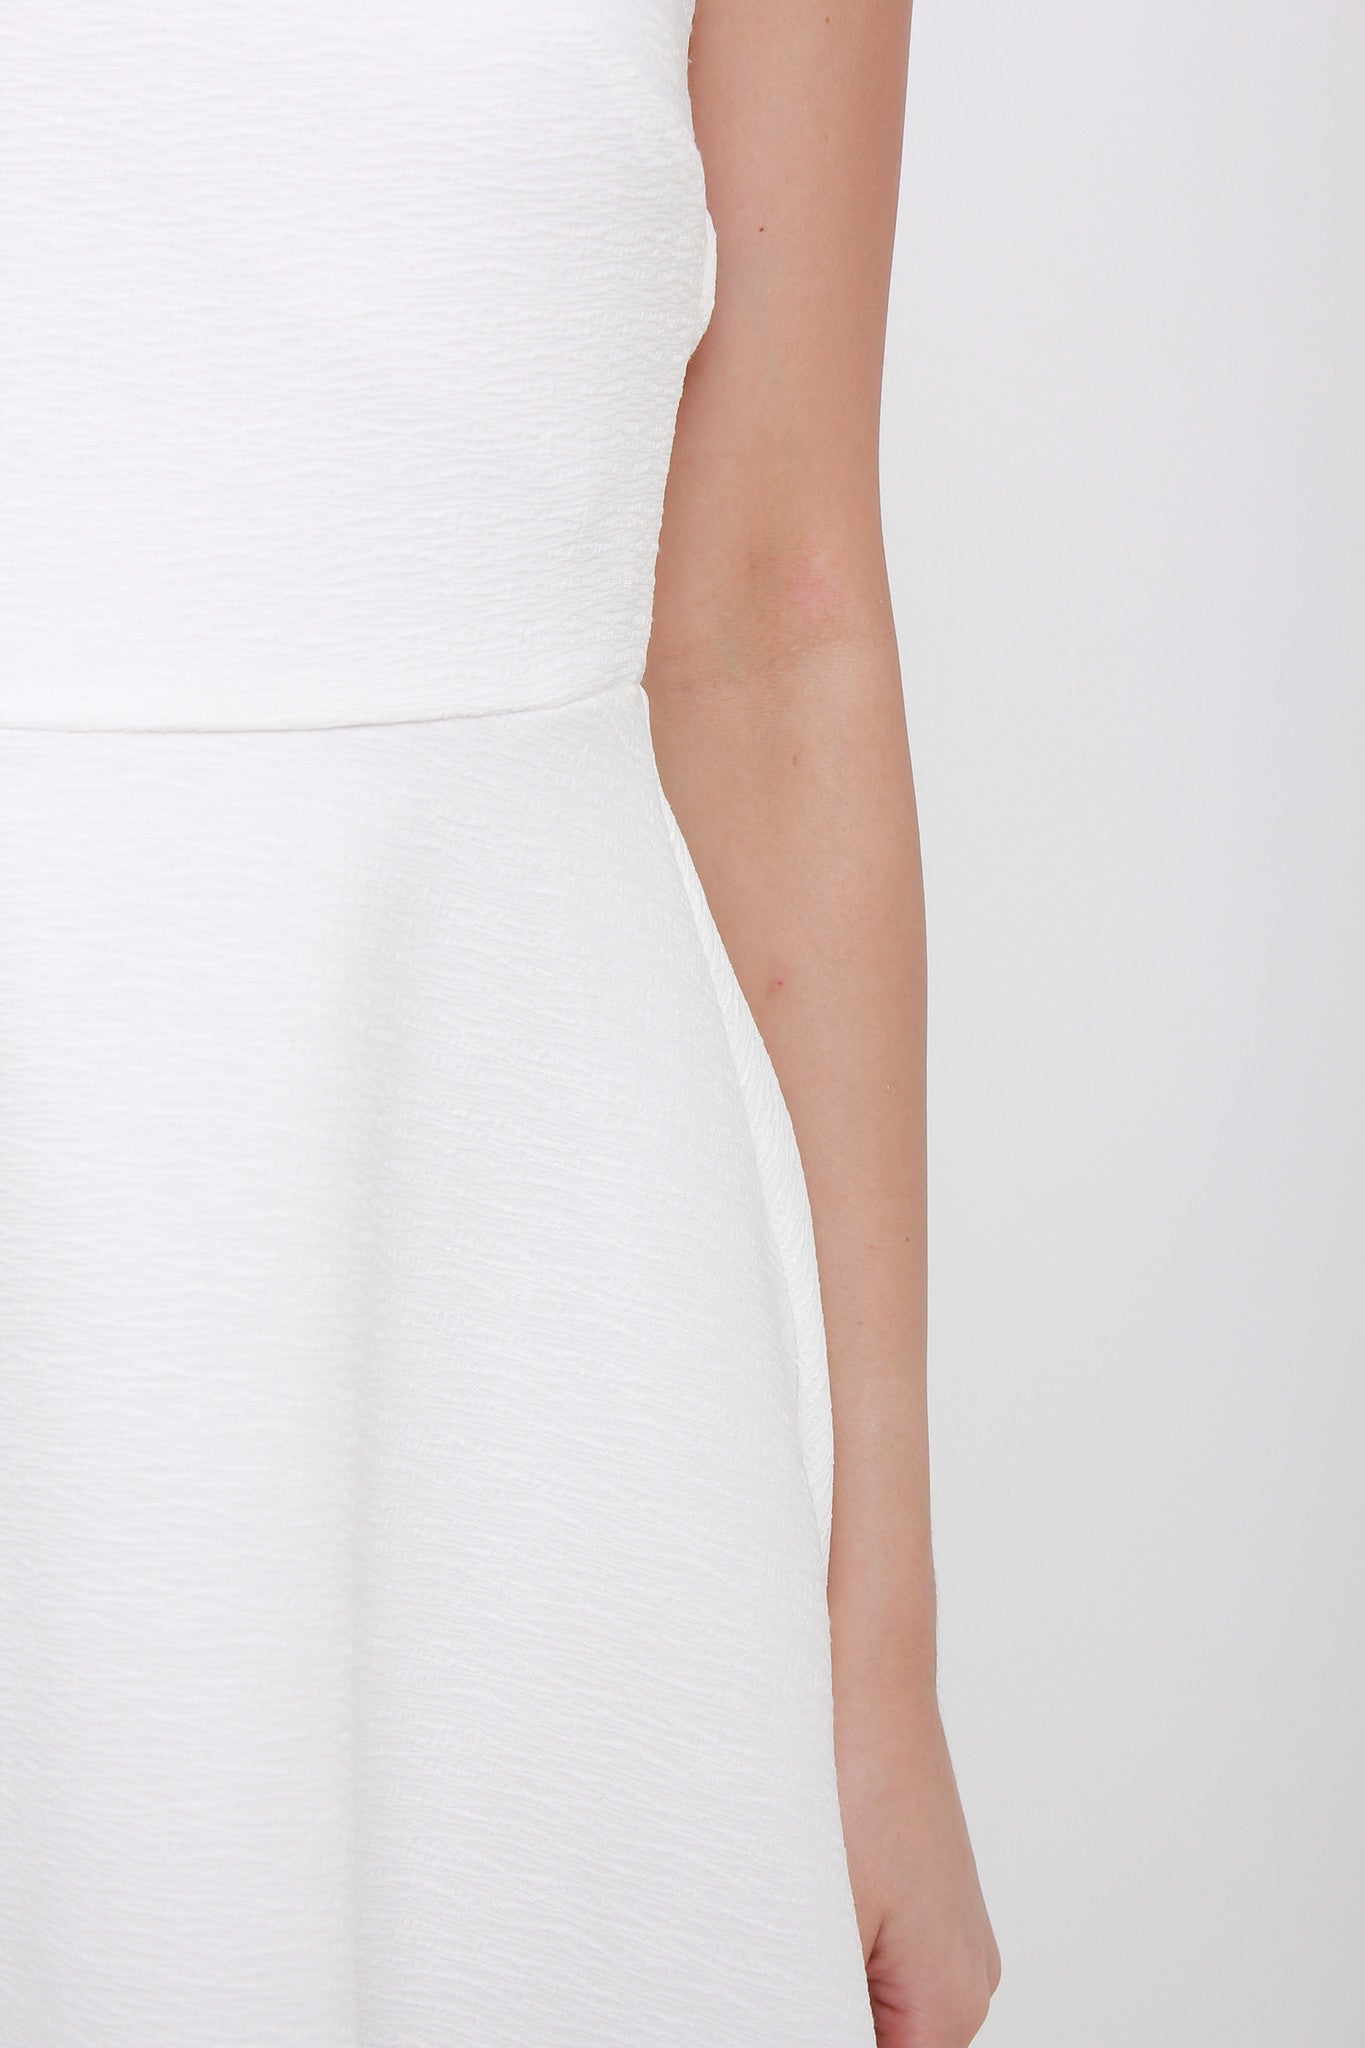 Valentina Emboss Back Cut Out Dress in White